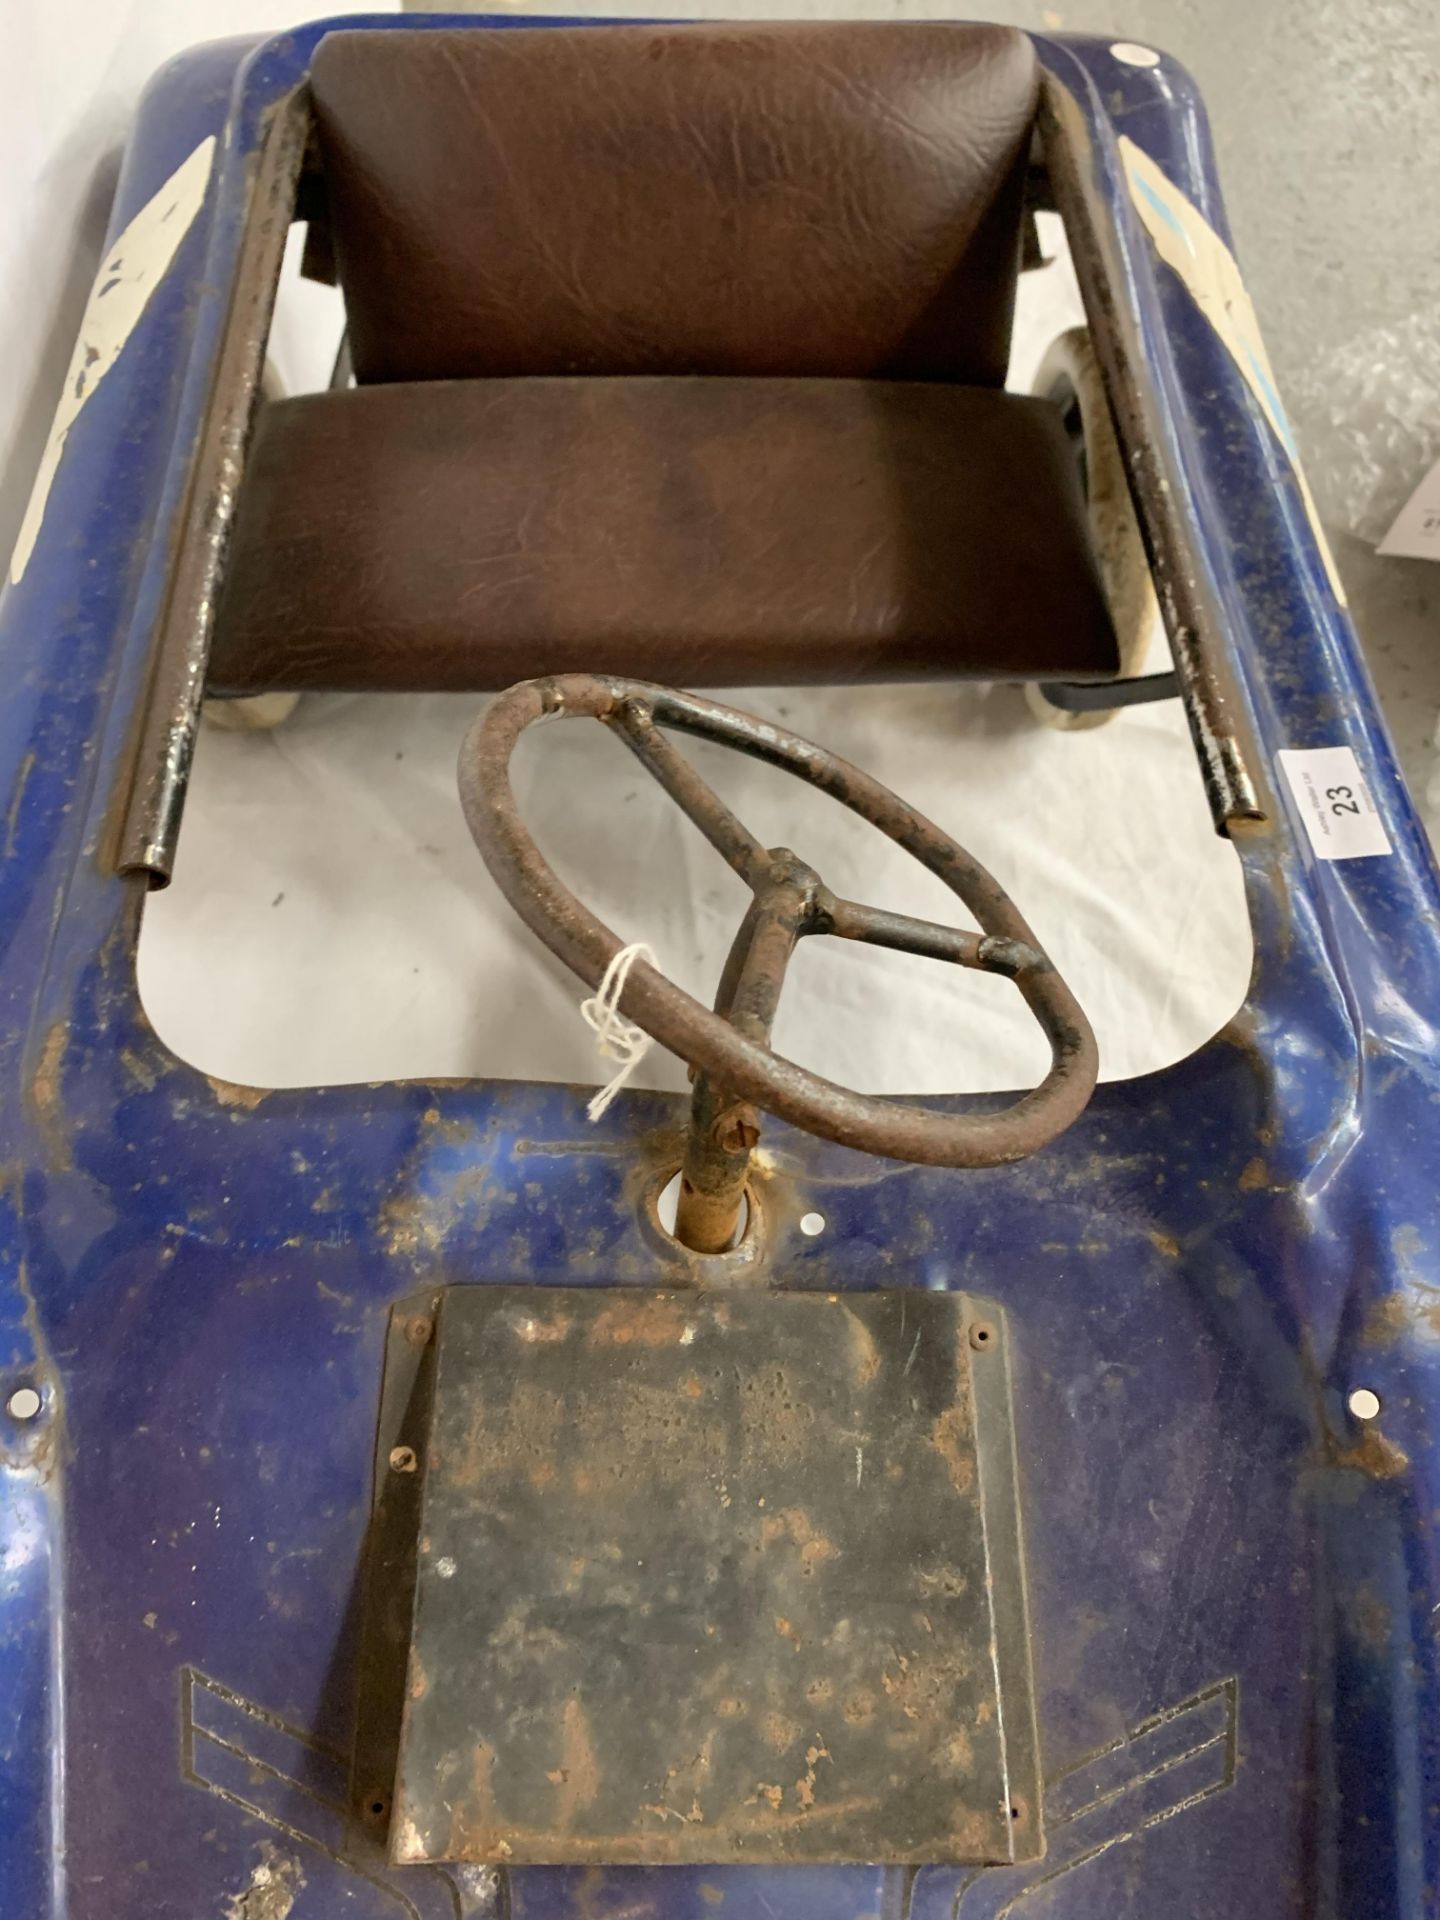 A VINTAGE TORING WOEI CHILDRENS PEDAL RACING CAR IN BLUE - Image 3 of 5